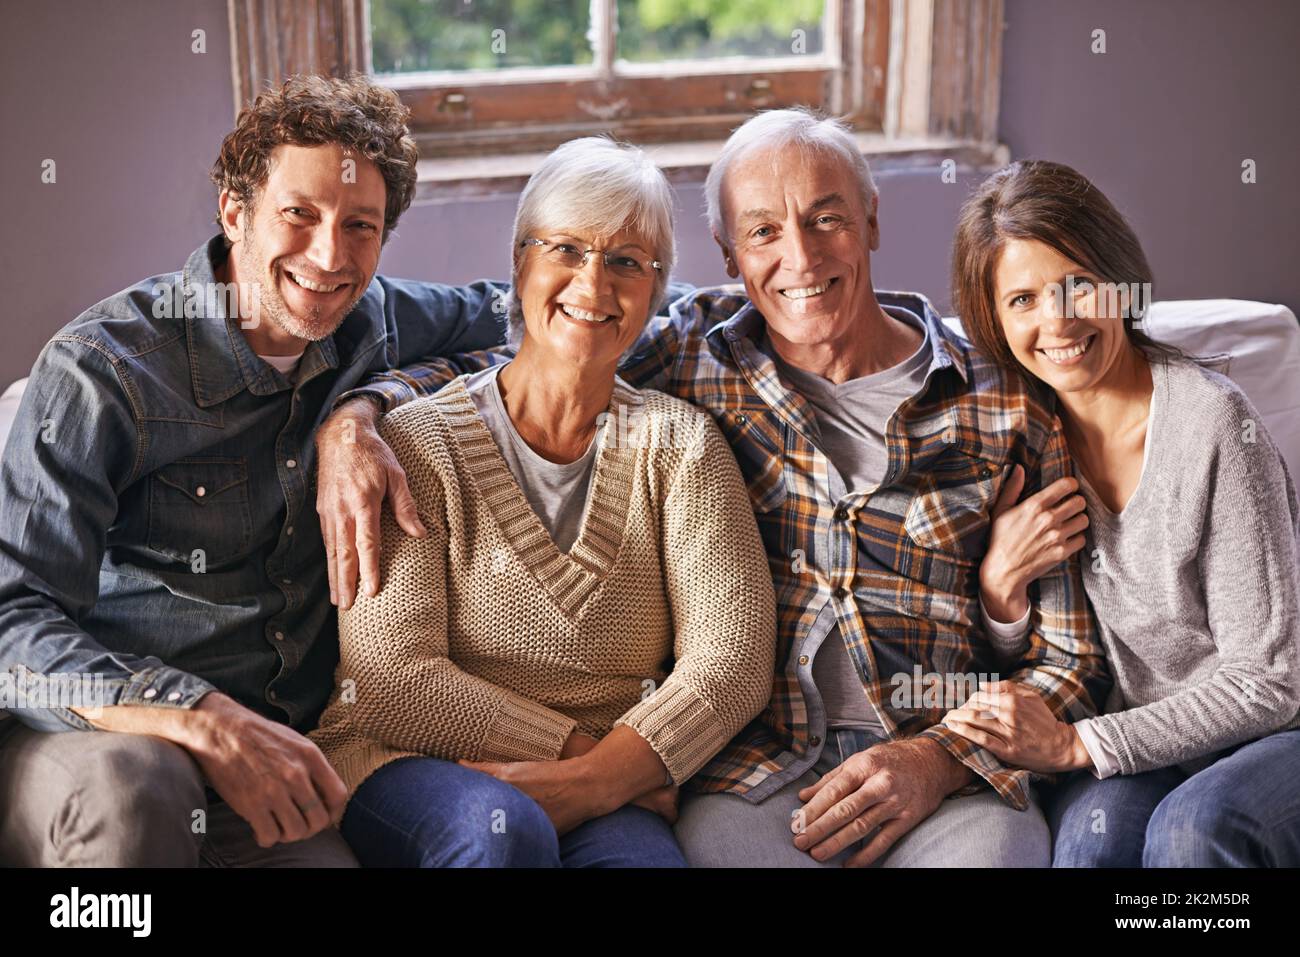 At the in-laws. A portrait of happy mature parents sitting with their adult children at home. Stock Photo